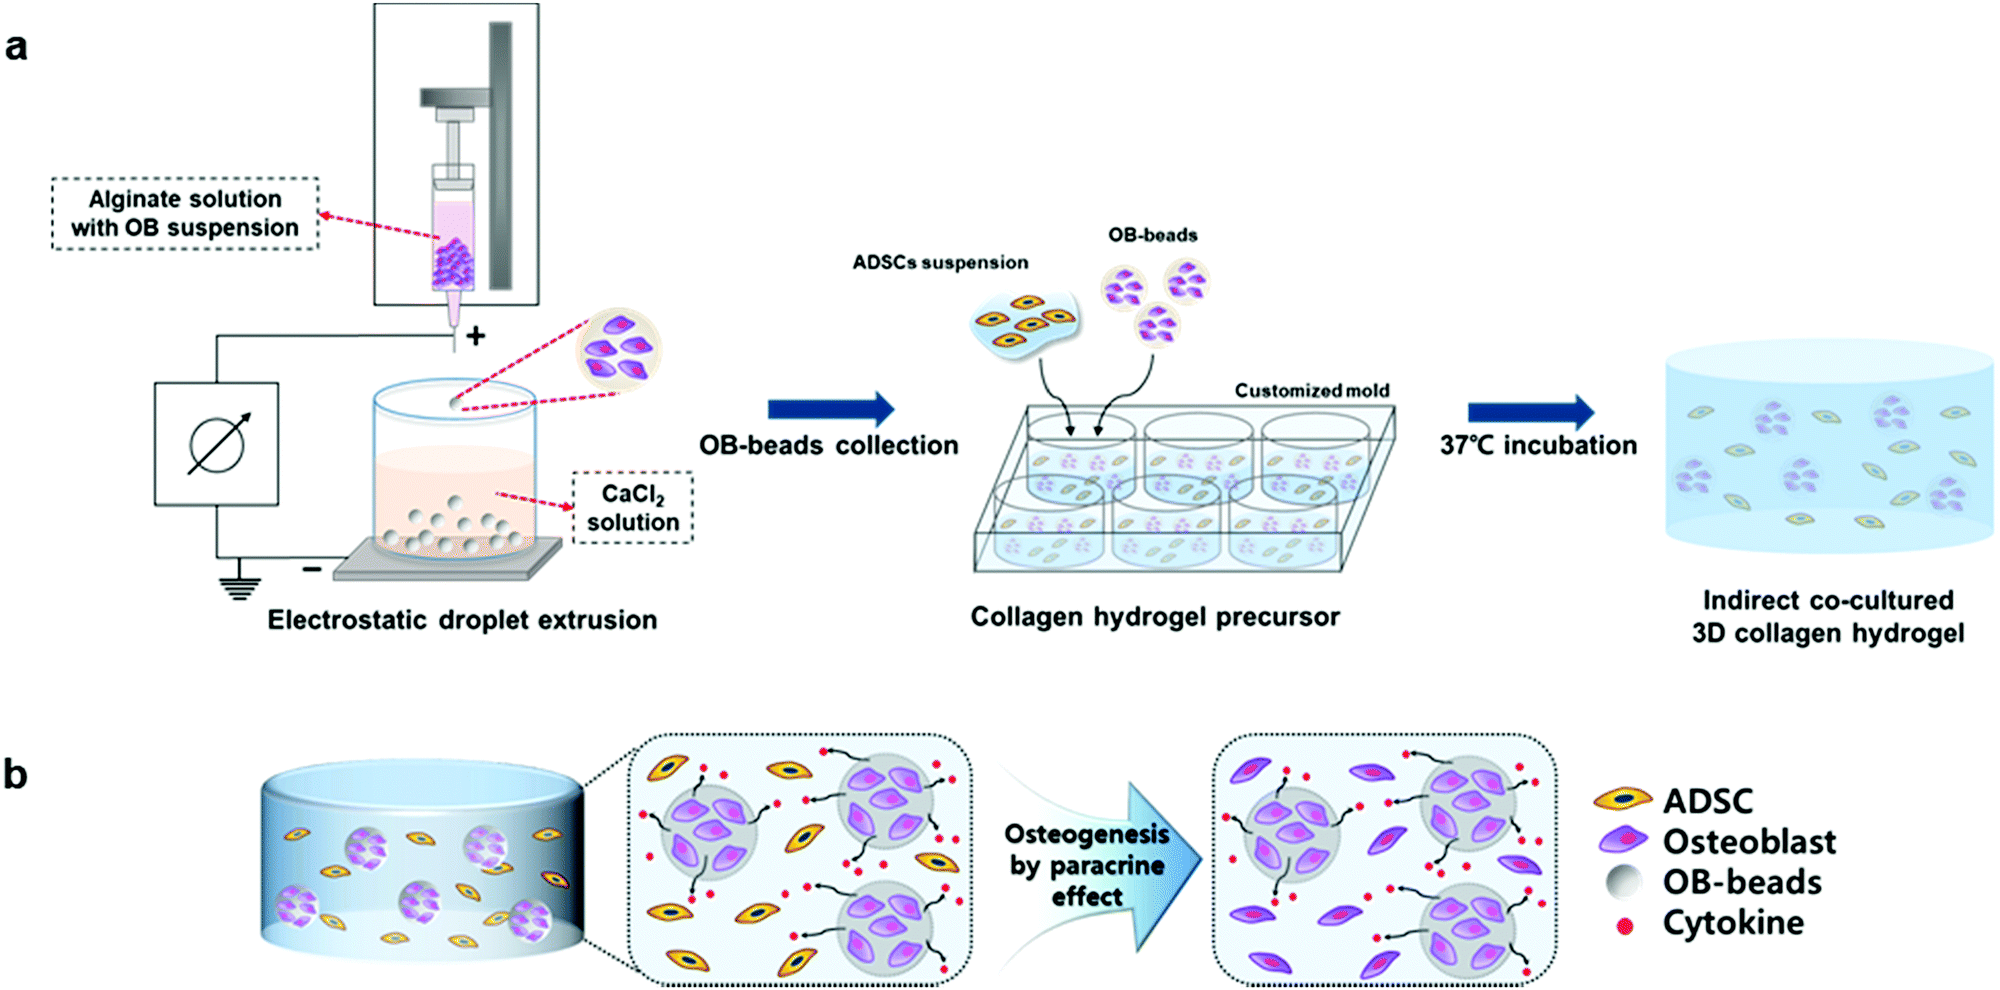 A novel 3D indirect co-culture system based on a collagen hydrogel scaffold  for enhancing the osteogenesis of stem cells - Journal of Materials  Chemistry B (RSC Publishing) DOI:10.1039/D0TB01770A